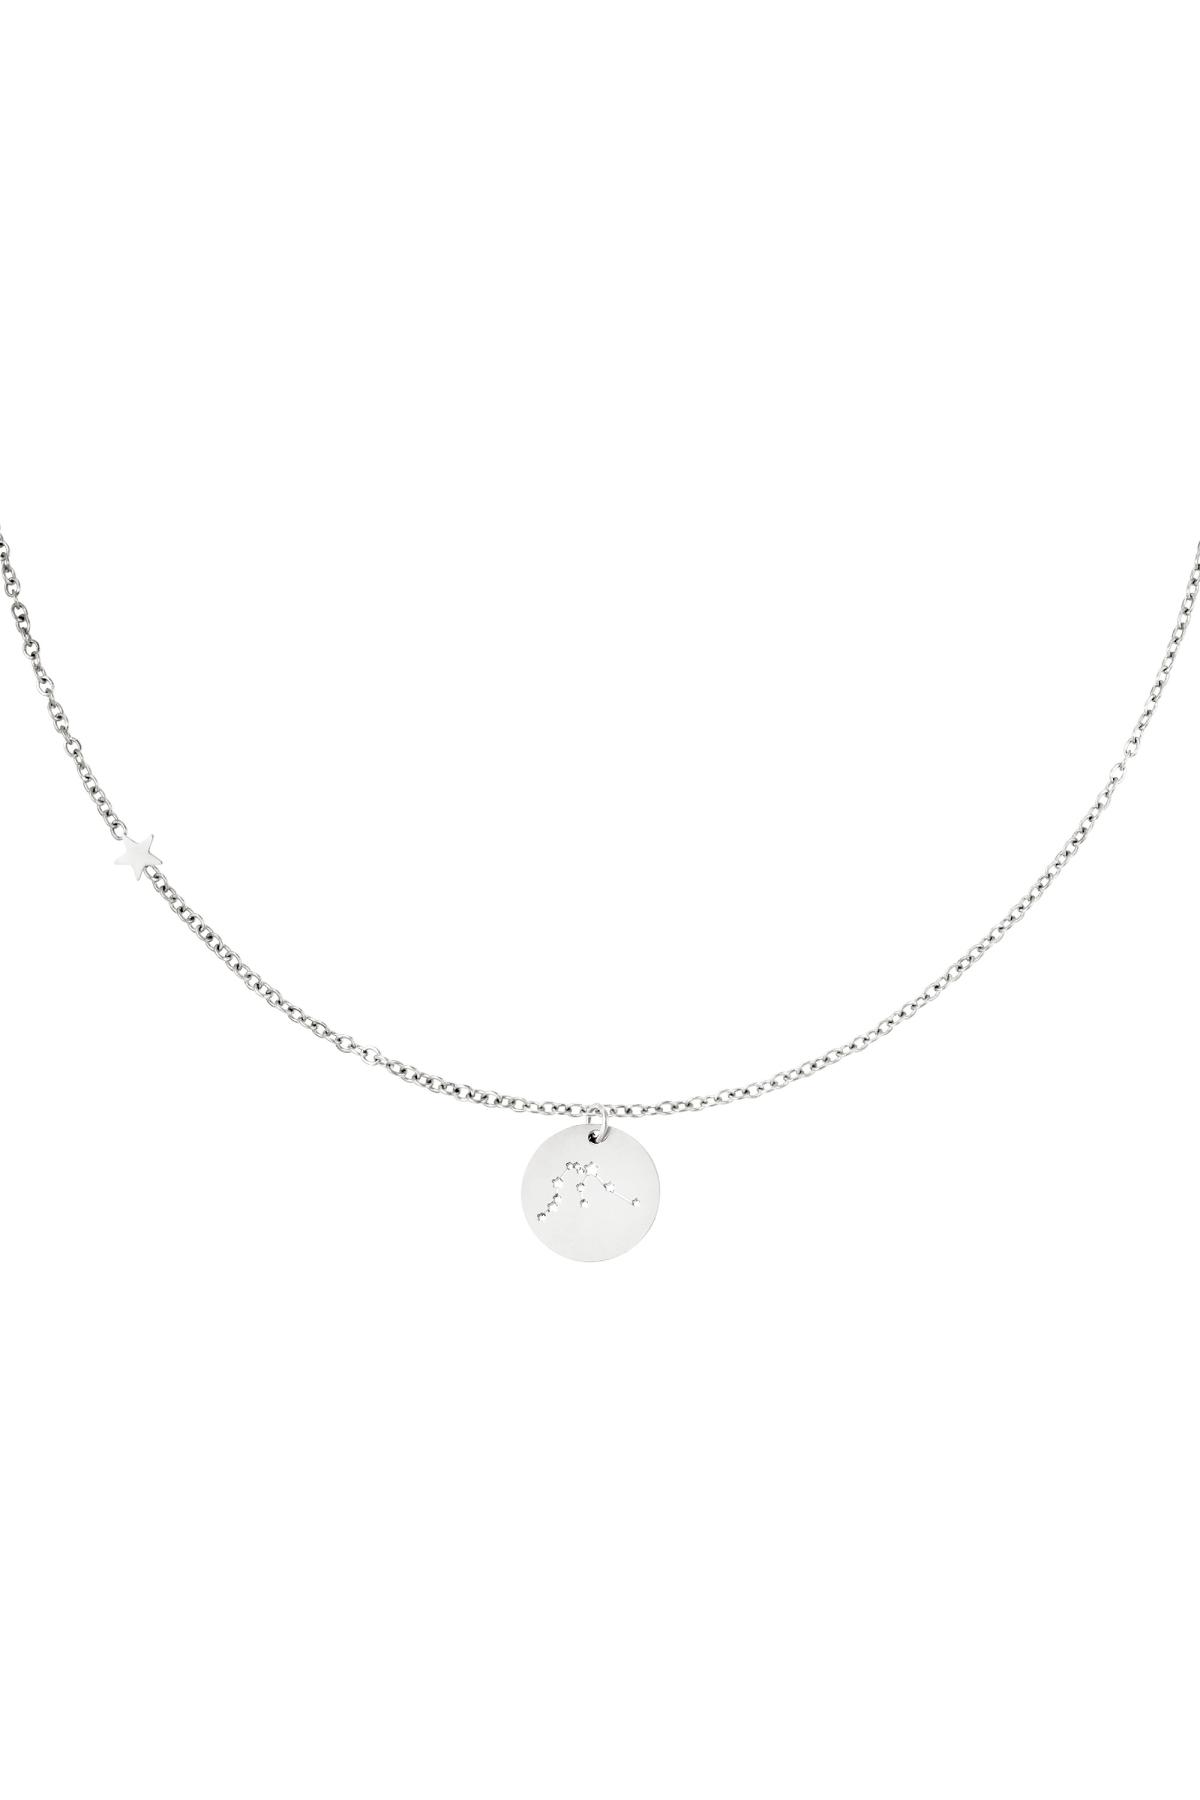 Necklace zodiac sign Acquarius Silver Stainless Steel